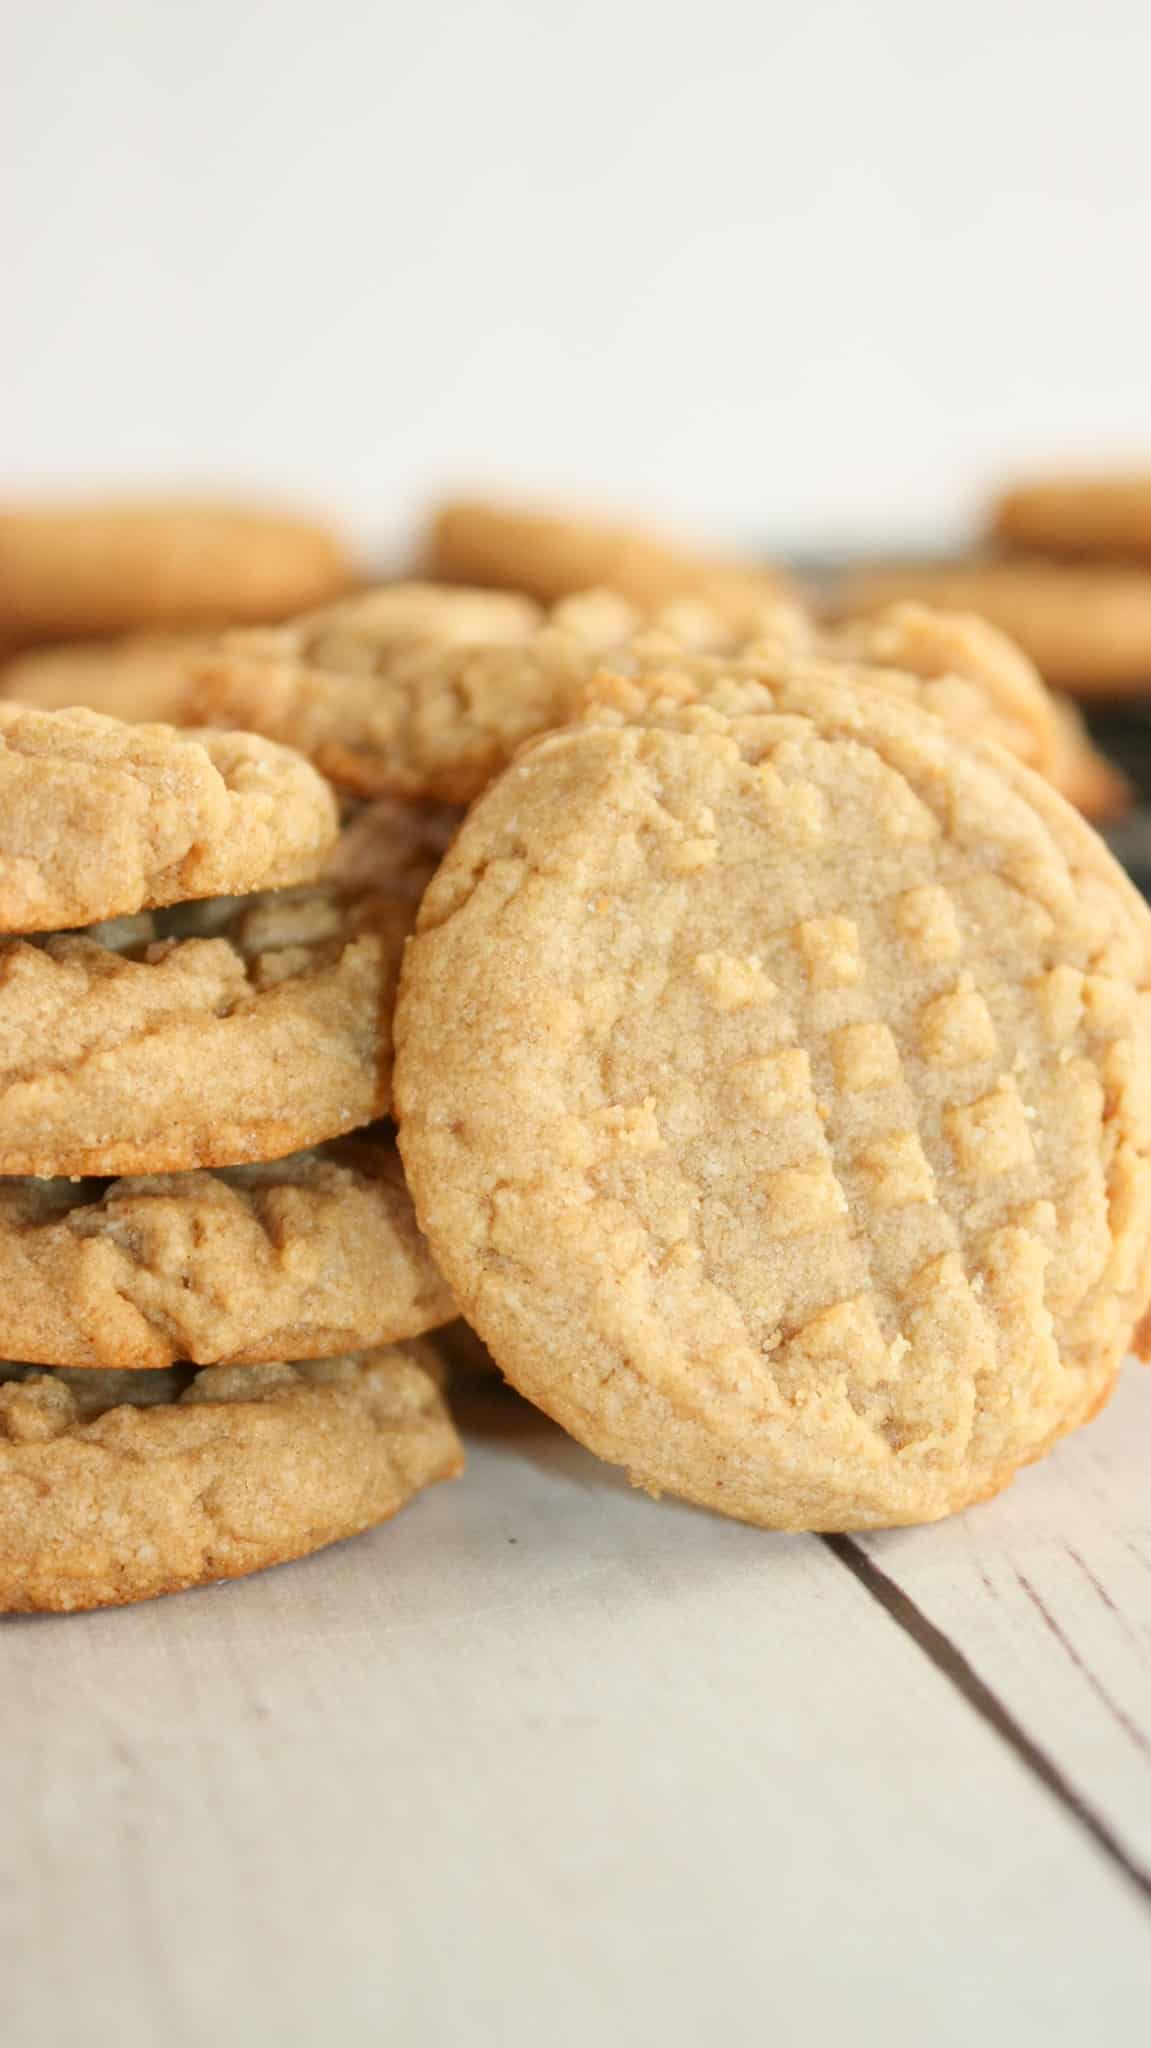 Looking for a quick and easy cookie recipe?  These gluten free Almond Flour Peanut Butter Cookies only use 4 ingredients and really hit the spot!